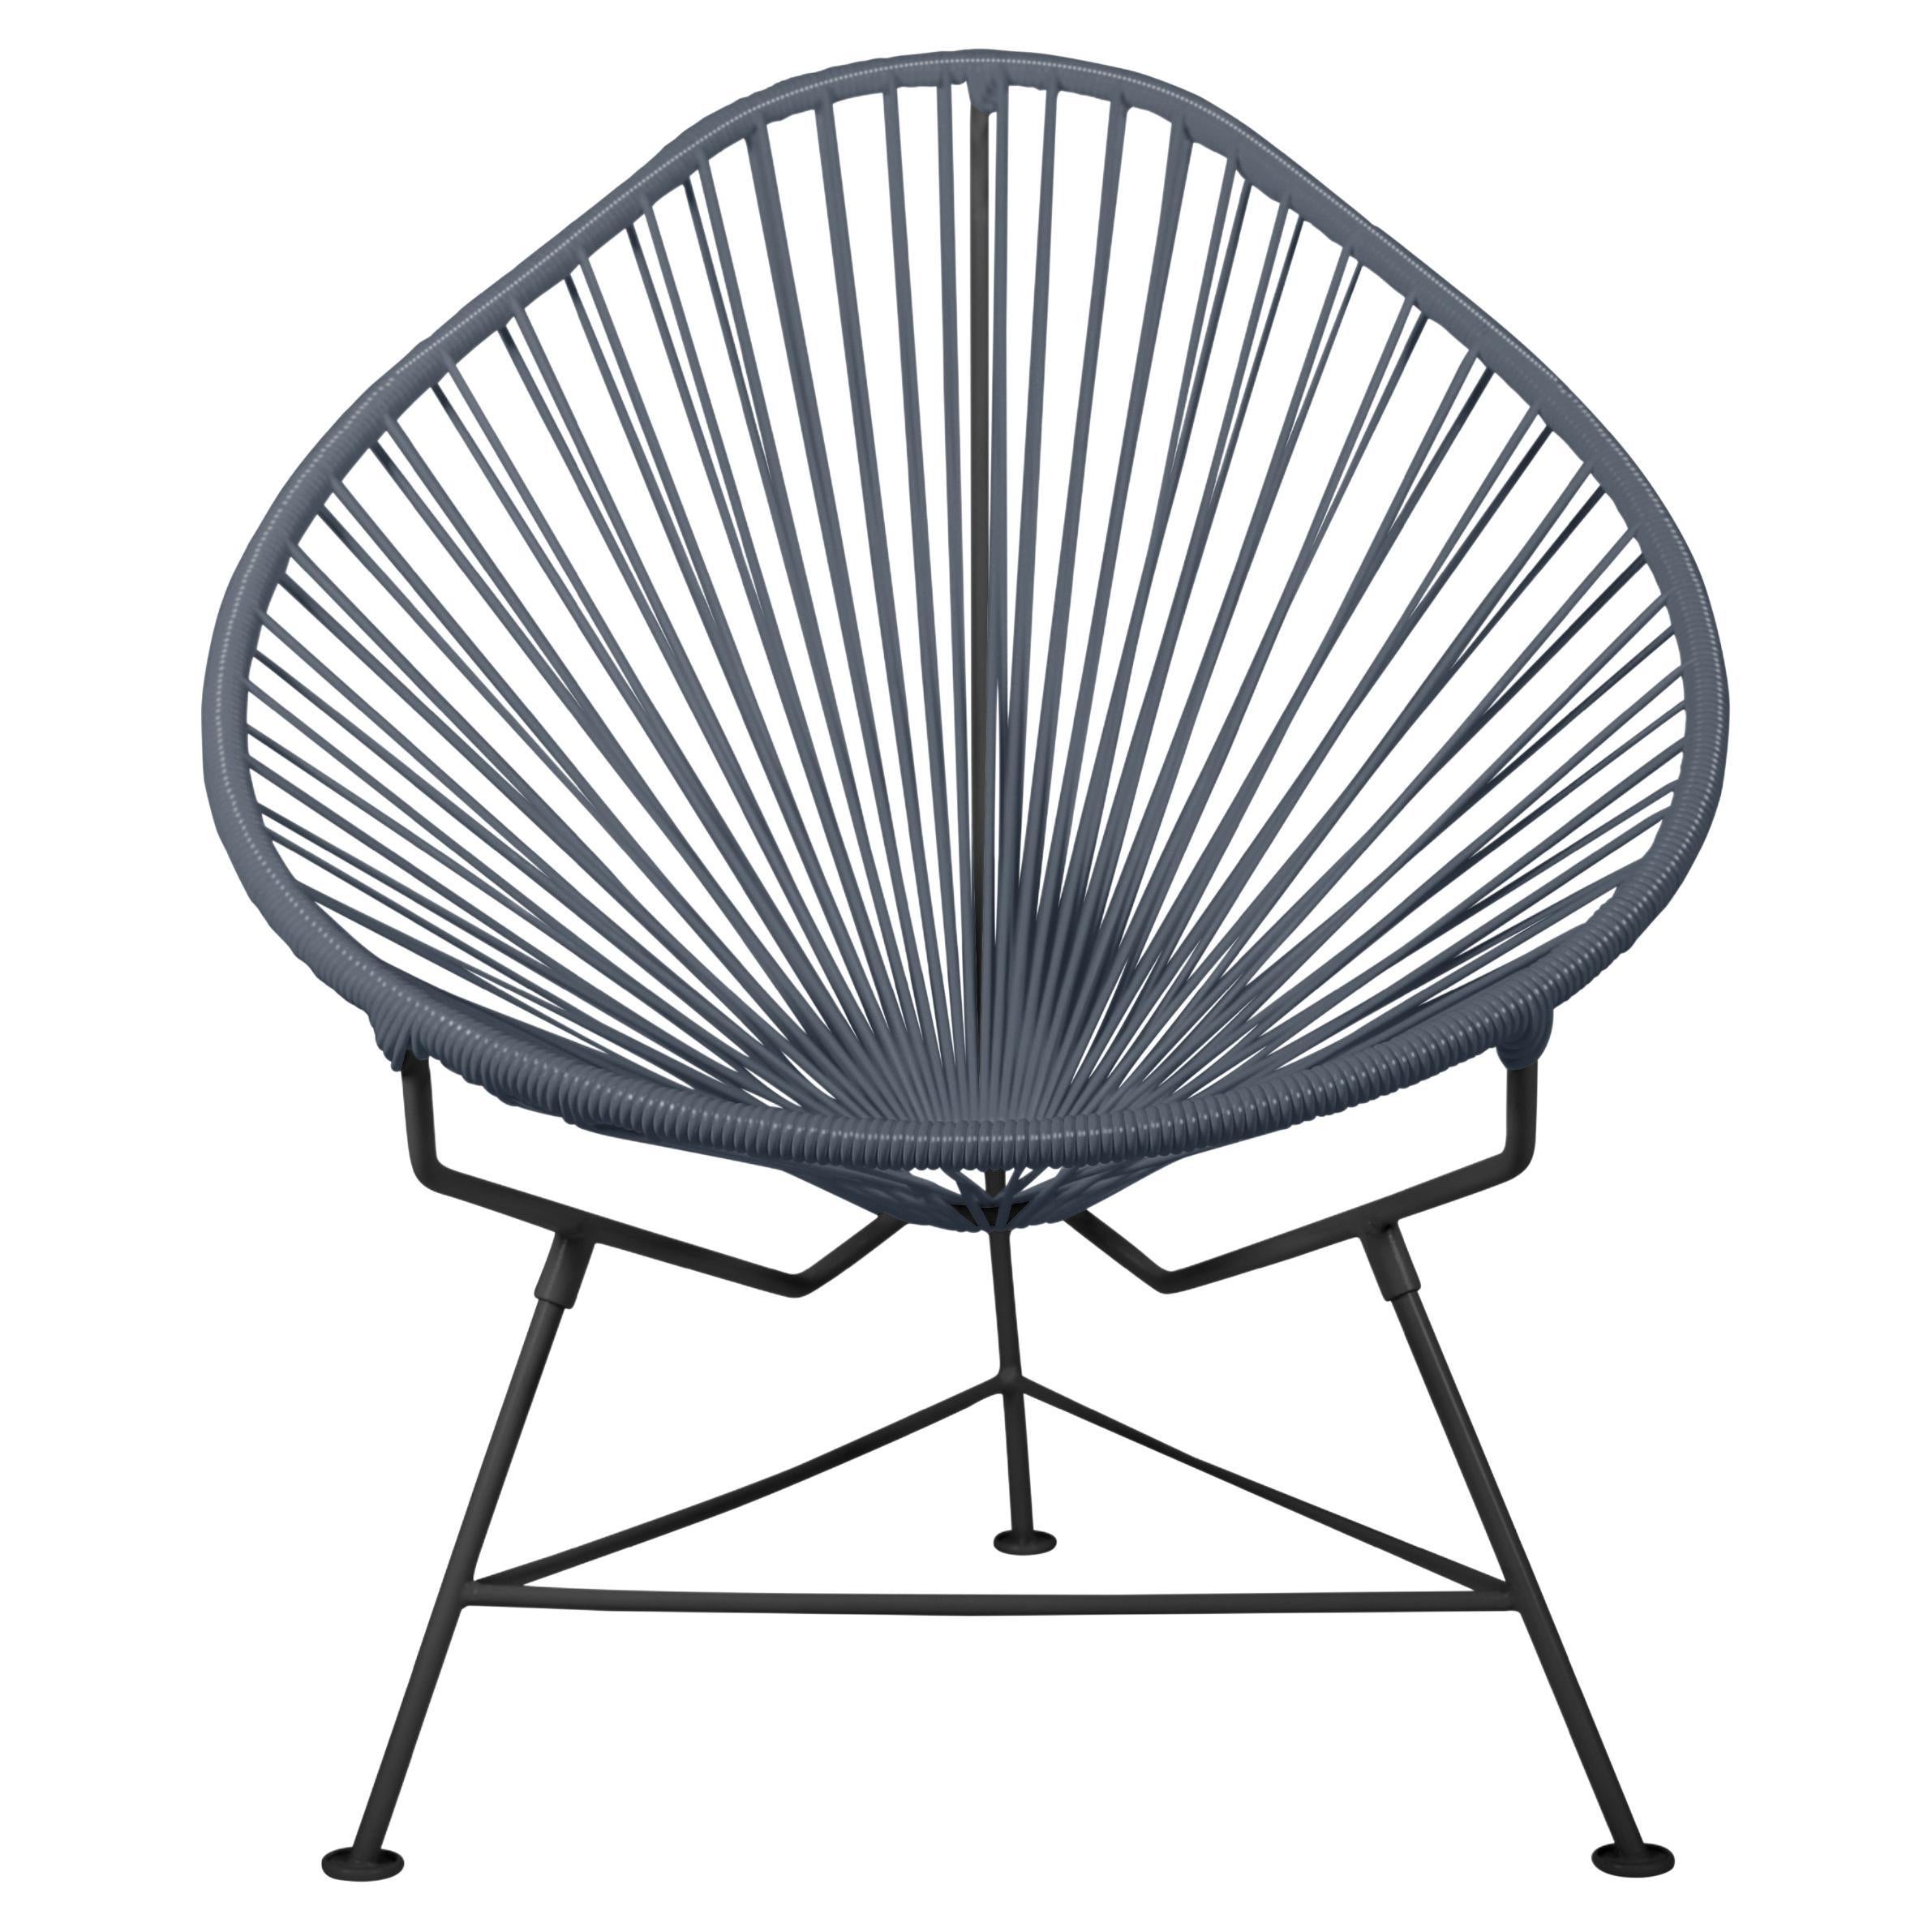 Innit Designs Acapulco Chair Grey Weave on Black Frame For Sale